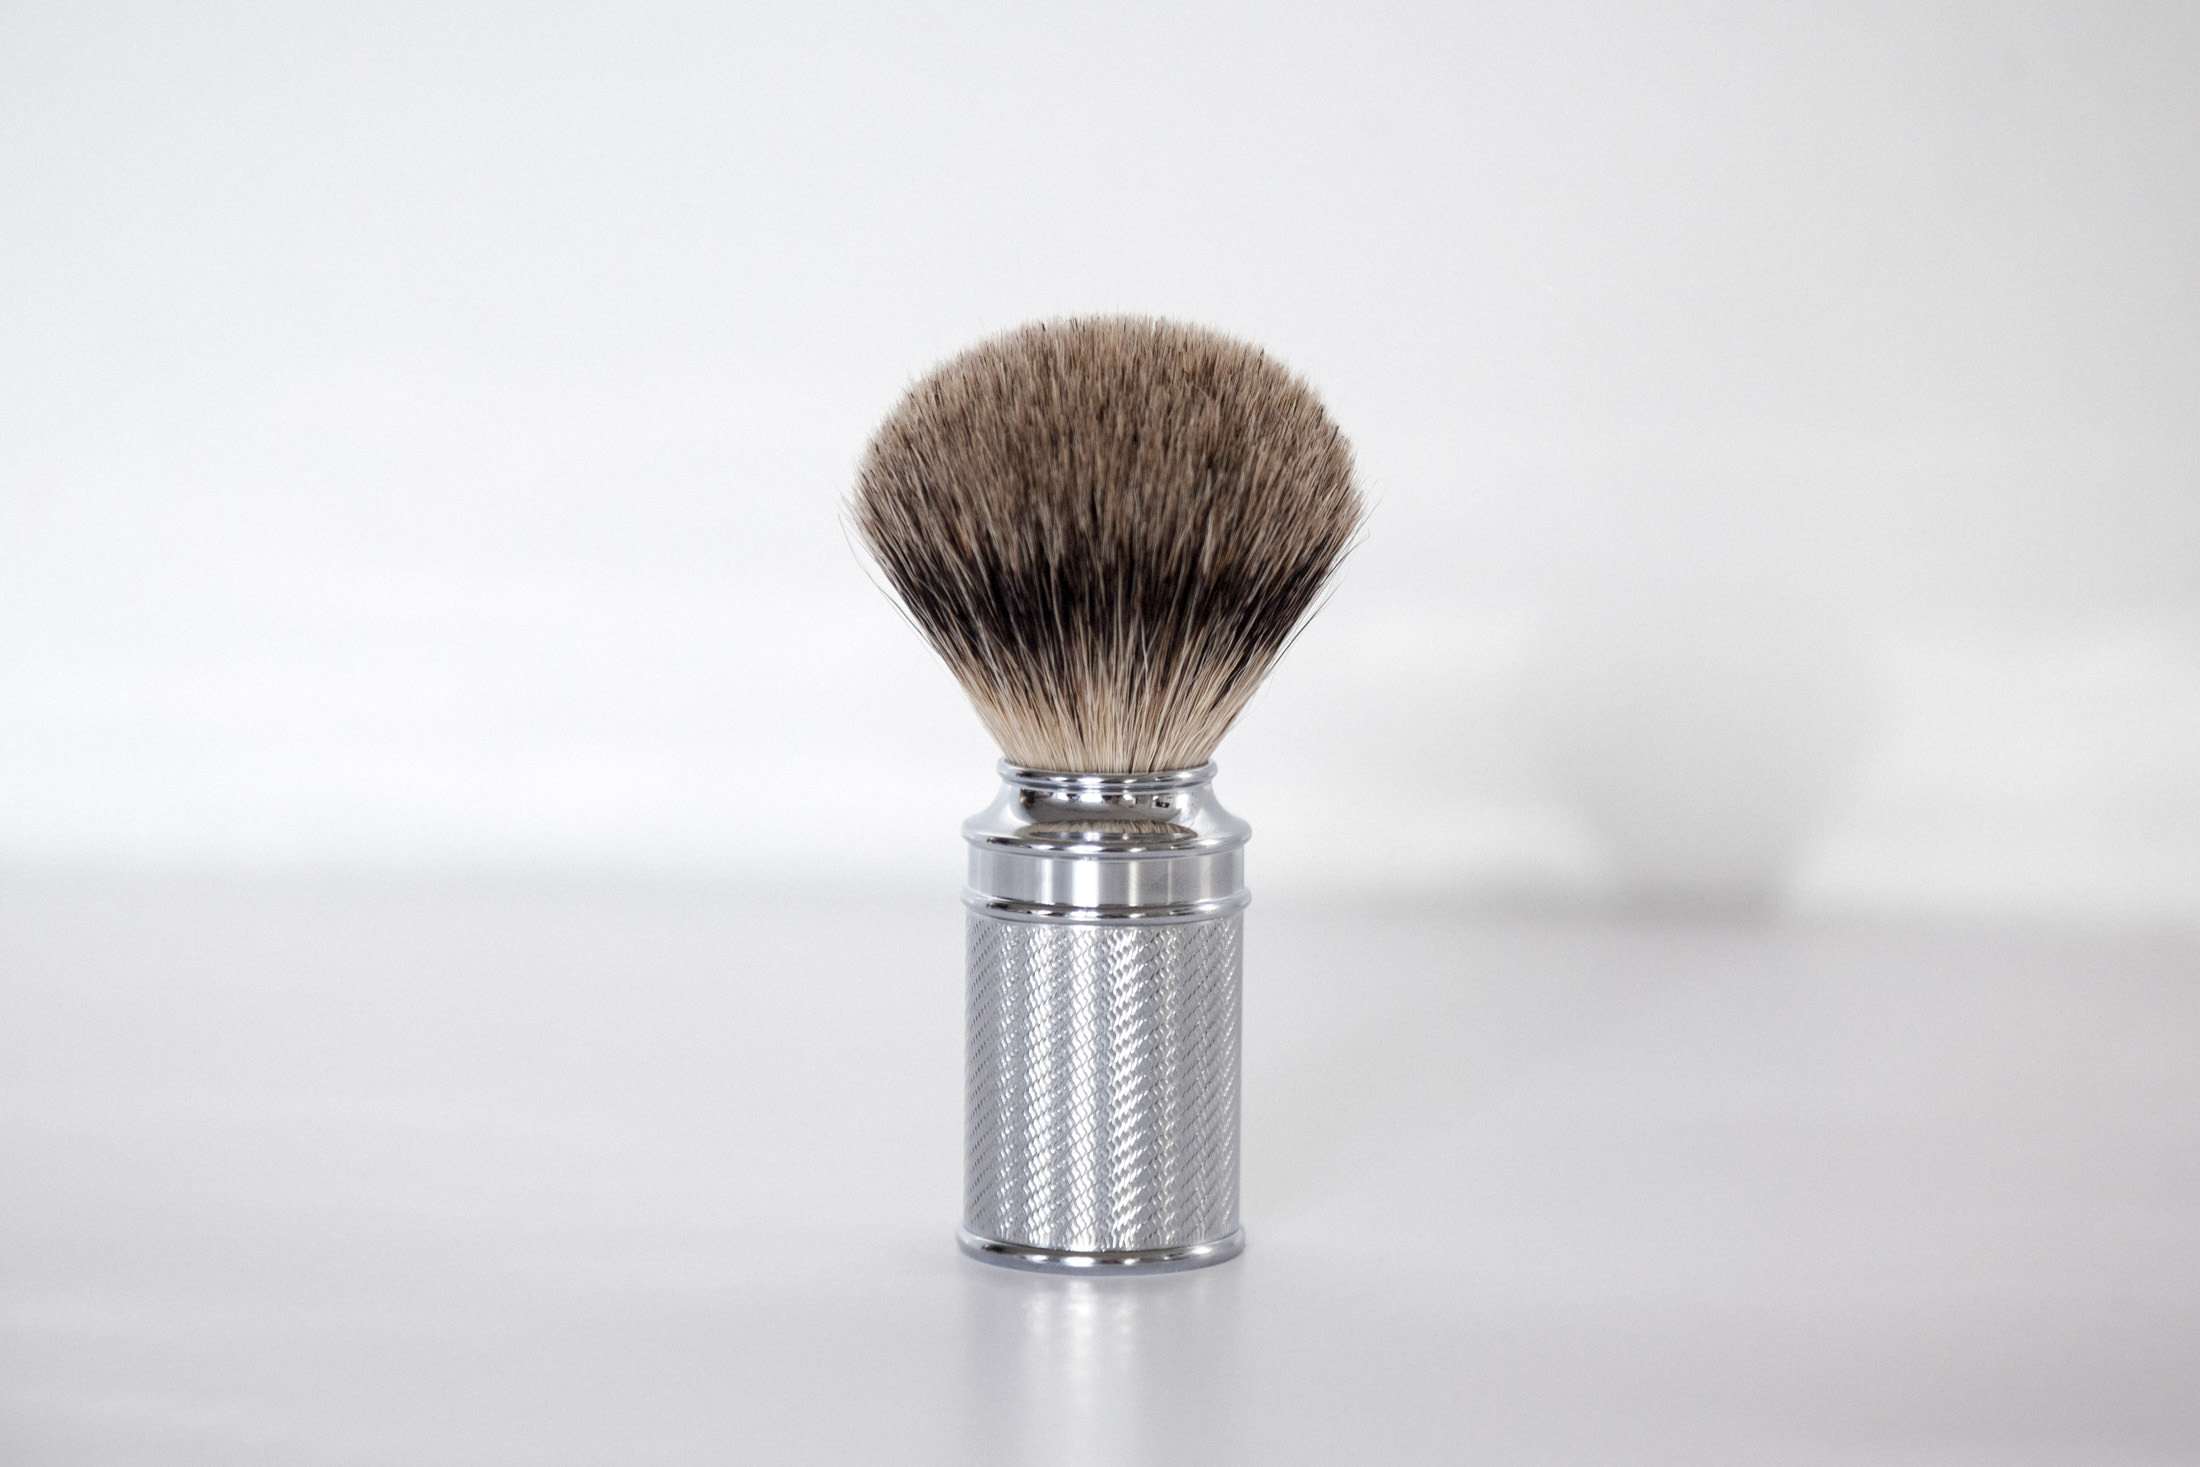 Each type of badger shaving brush uses fur from different sides of the animal